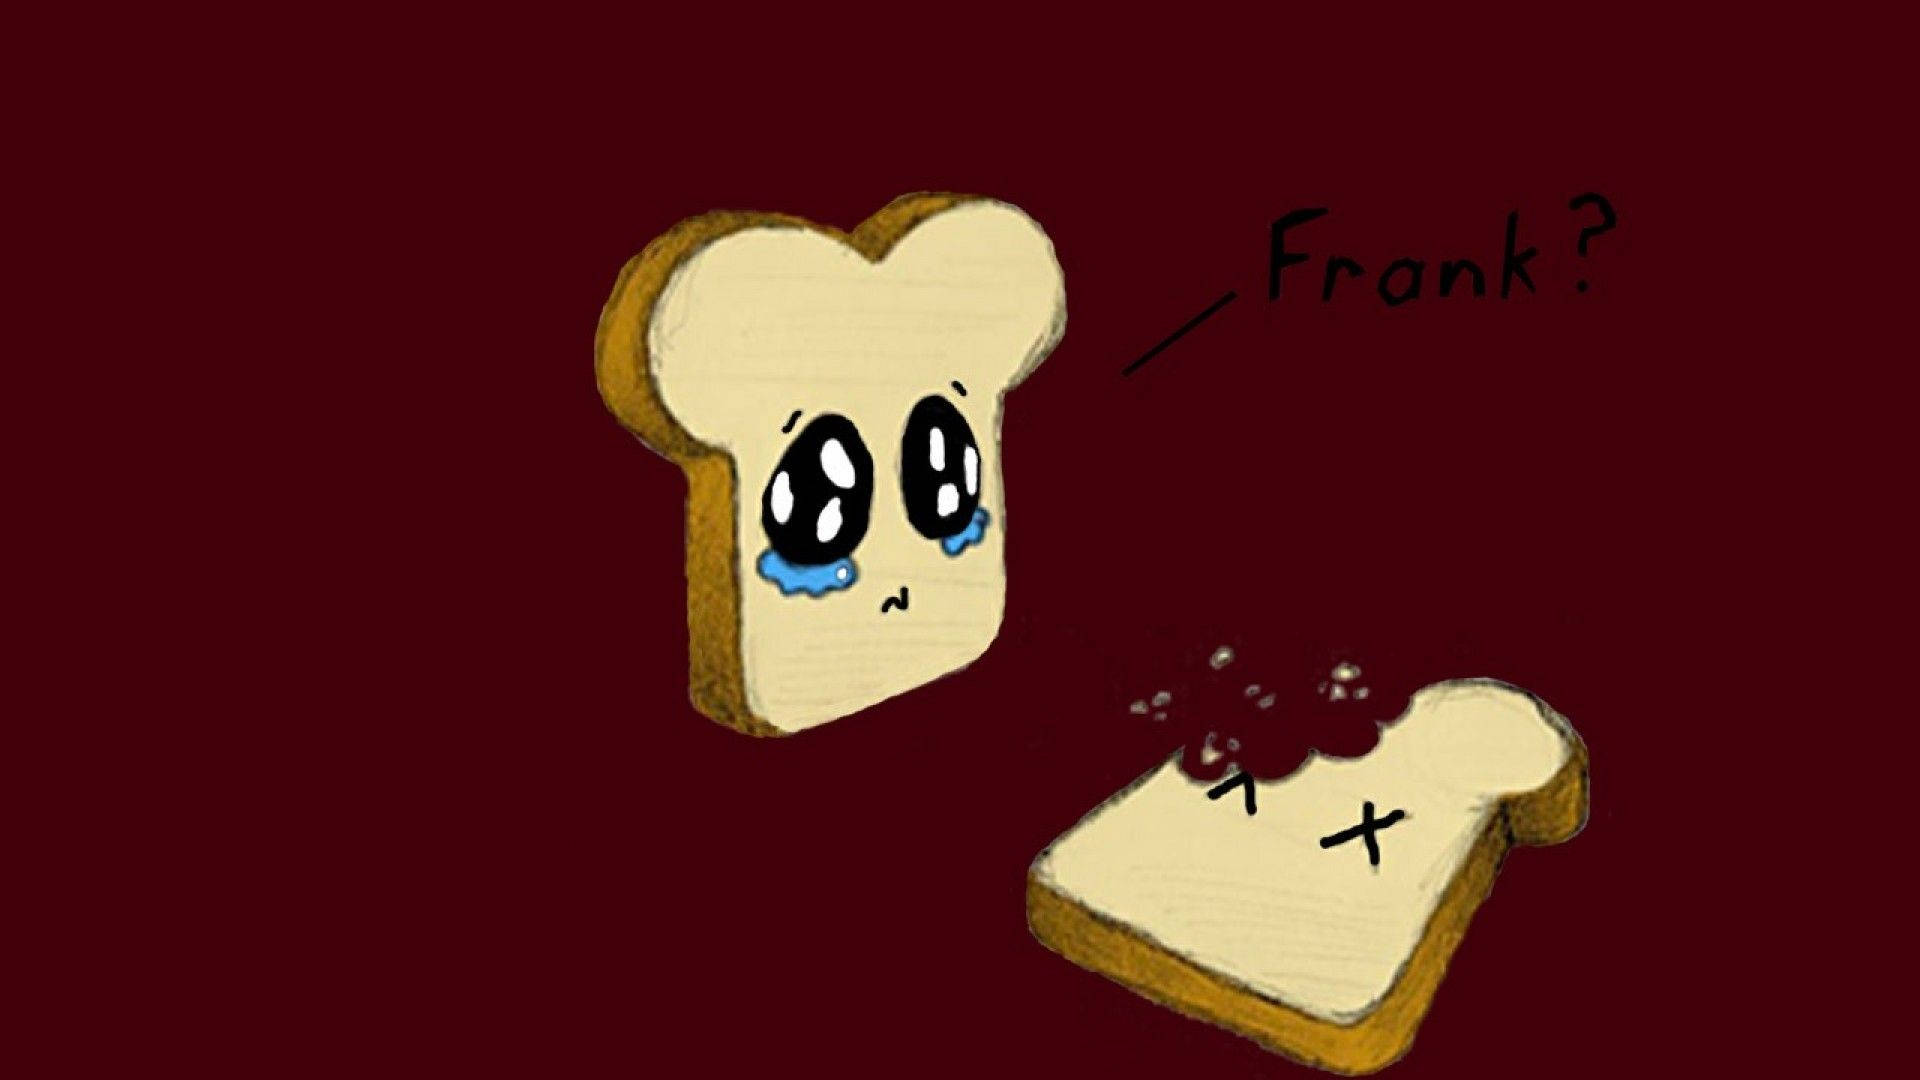 Bread crying over his partner eaten by ants, cute sad meme.